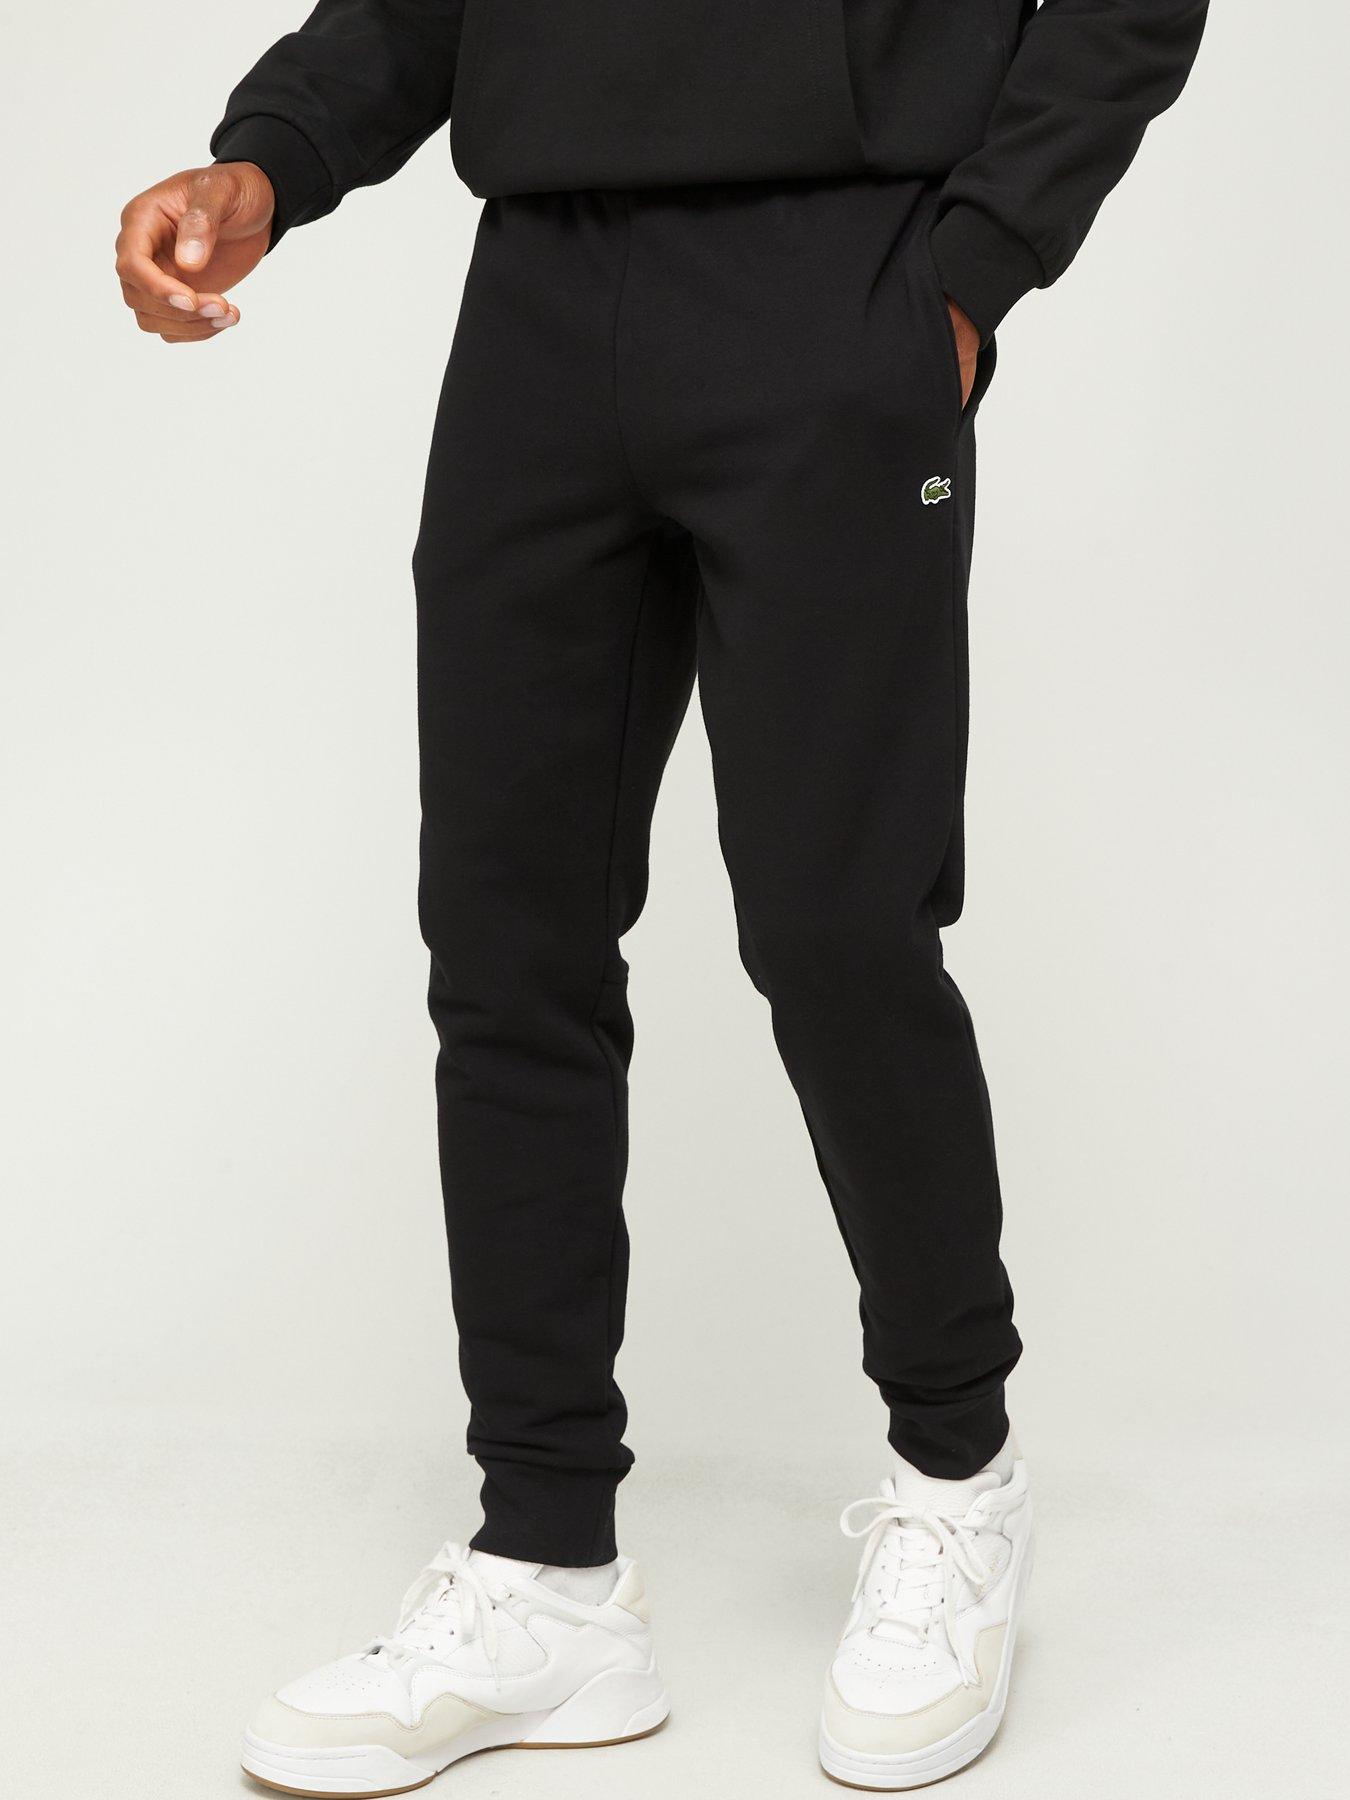   Essentials Men's Fleece Sweatpant (Available in Big &  Tall), Black, X-Small : Clothing, Shoes & Jewelry